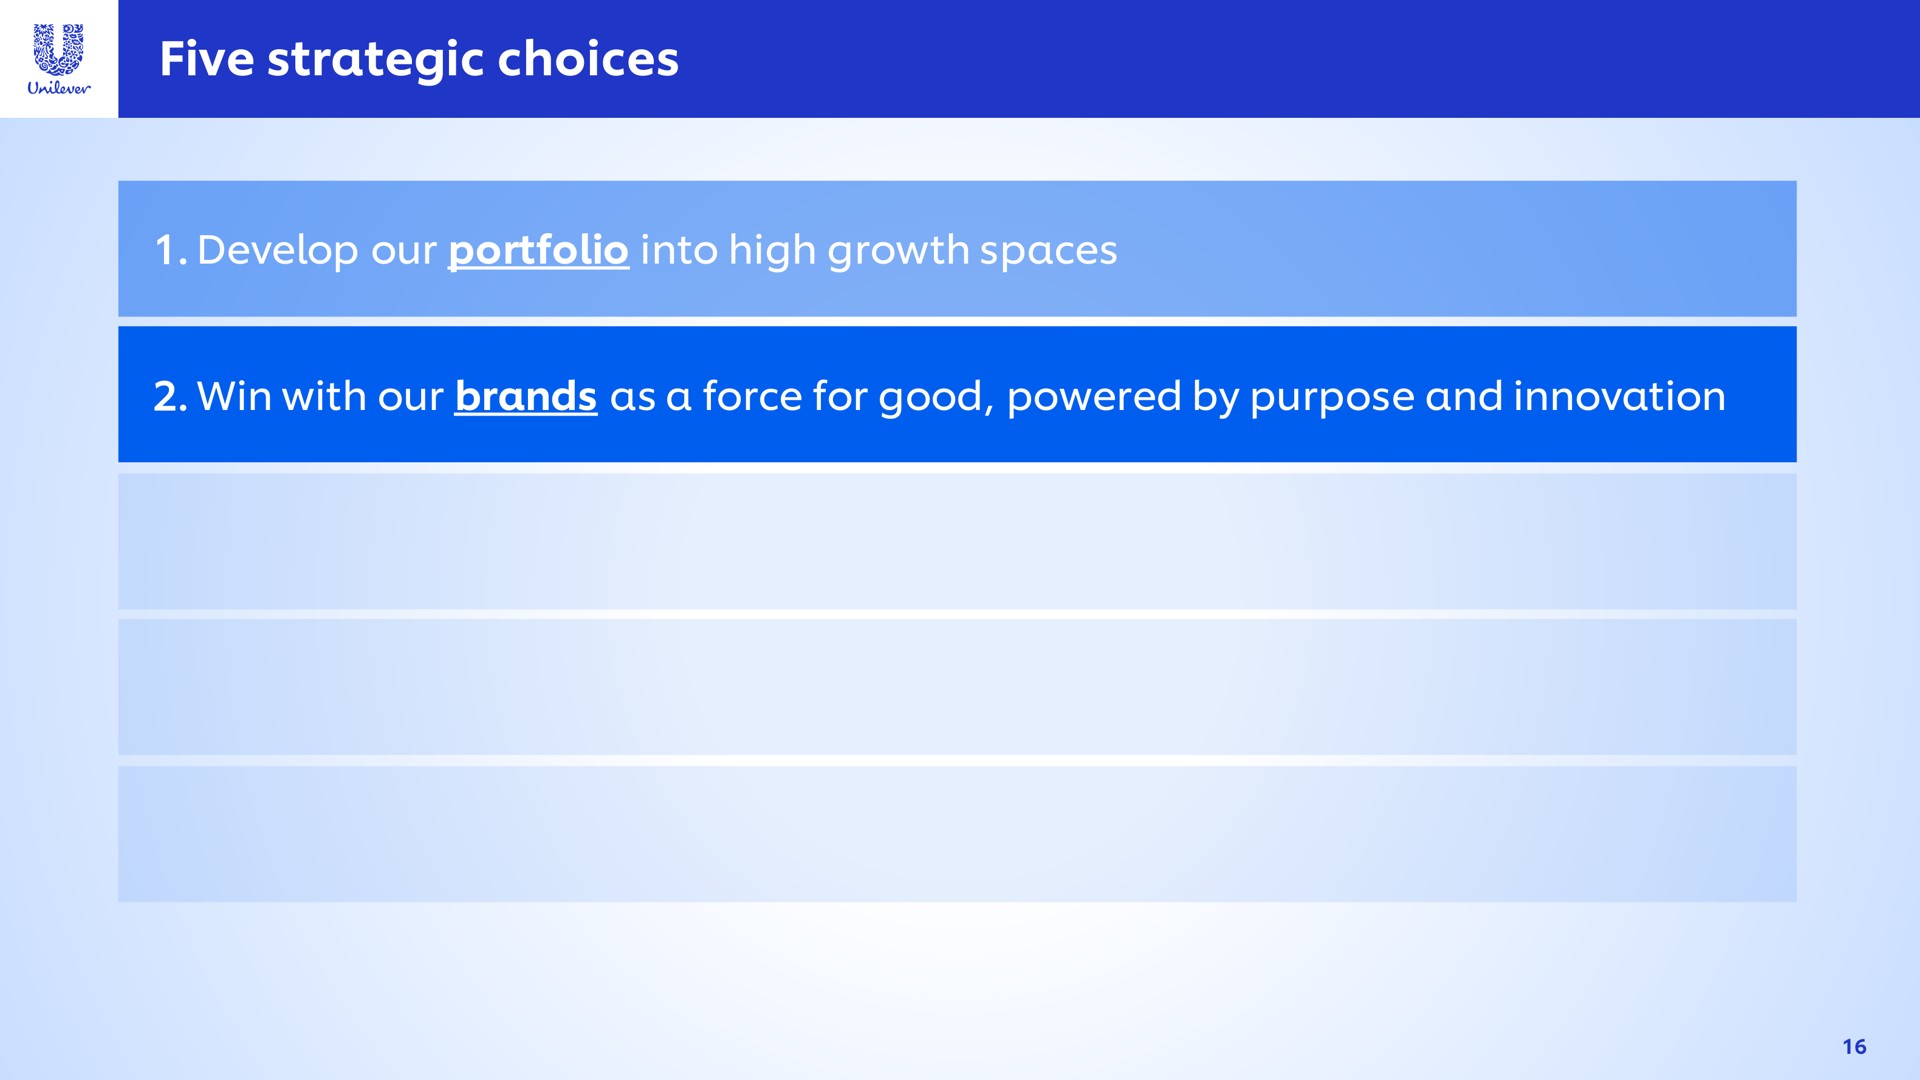 five strategic choices win with our brands as a force for good powered by purpose and innovation | Unilever